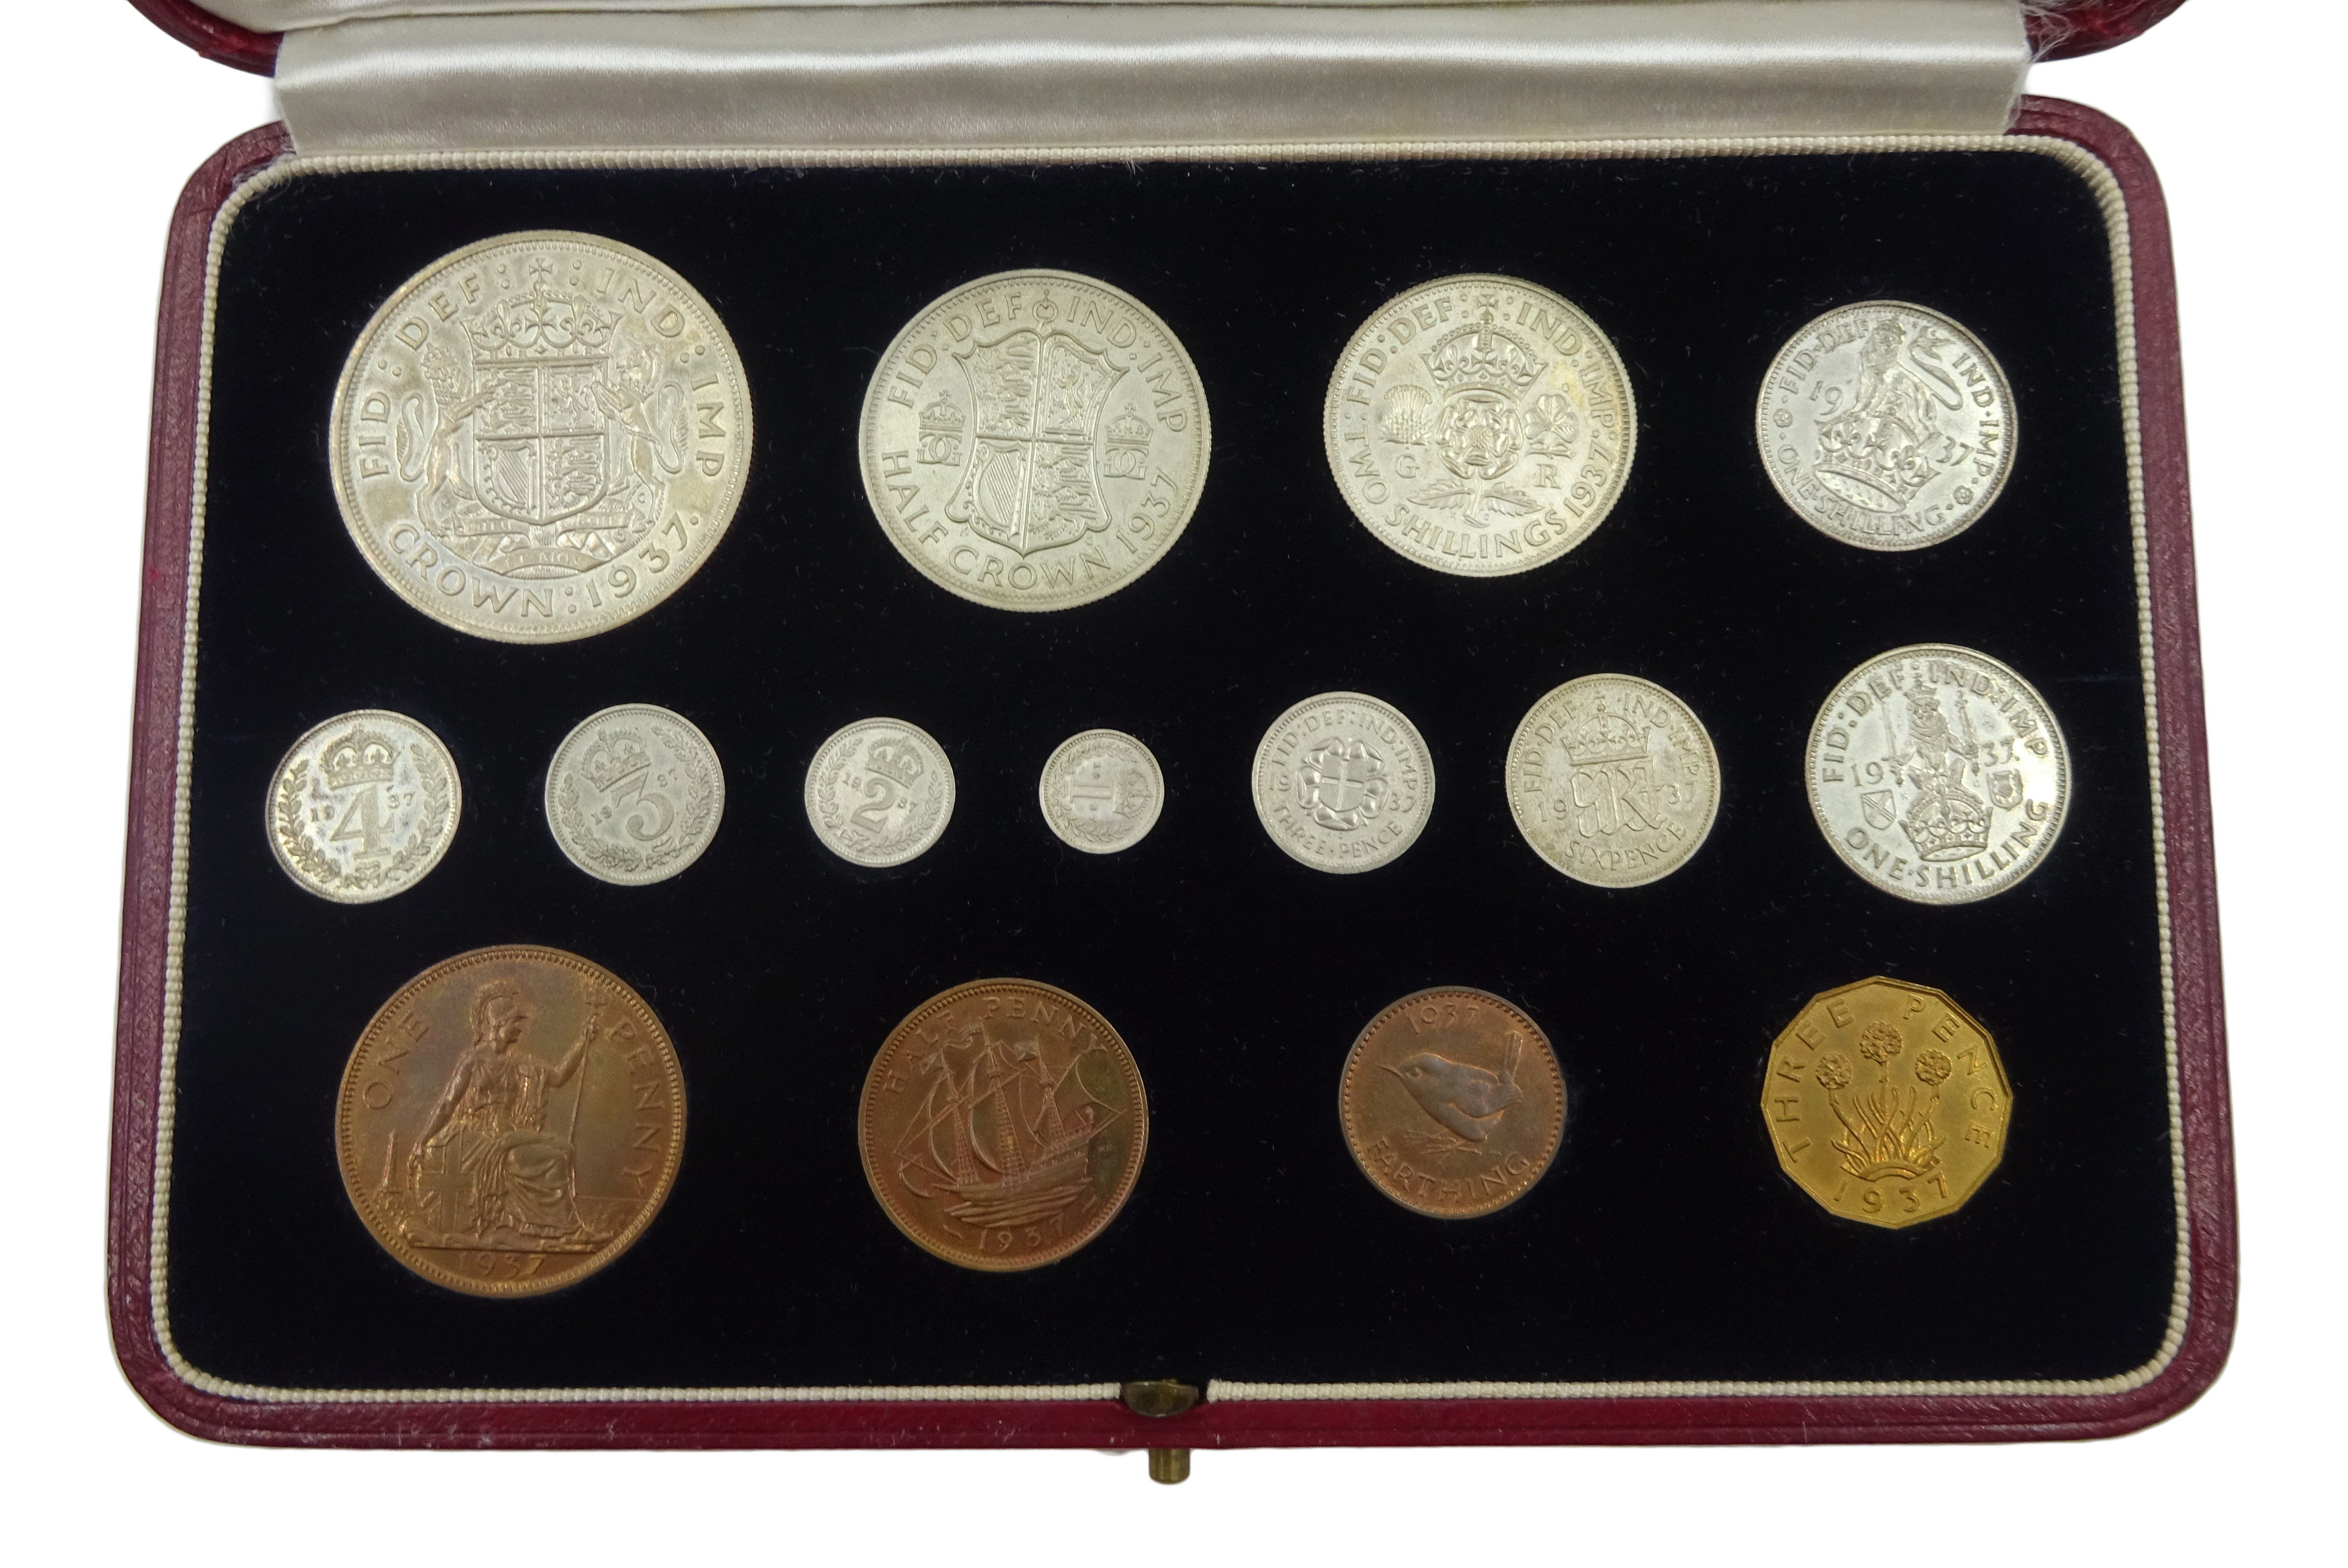 King George VI 1937 specimen coin set, fifteen coins from farthing to crown including Maundy money, - Image 5 of 5